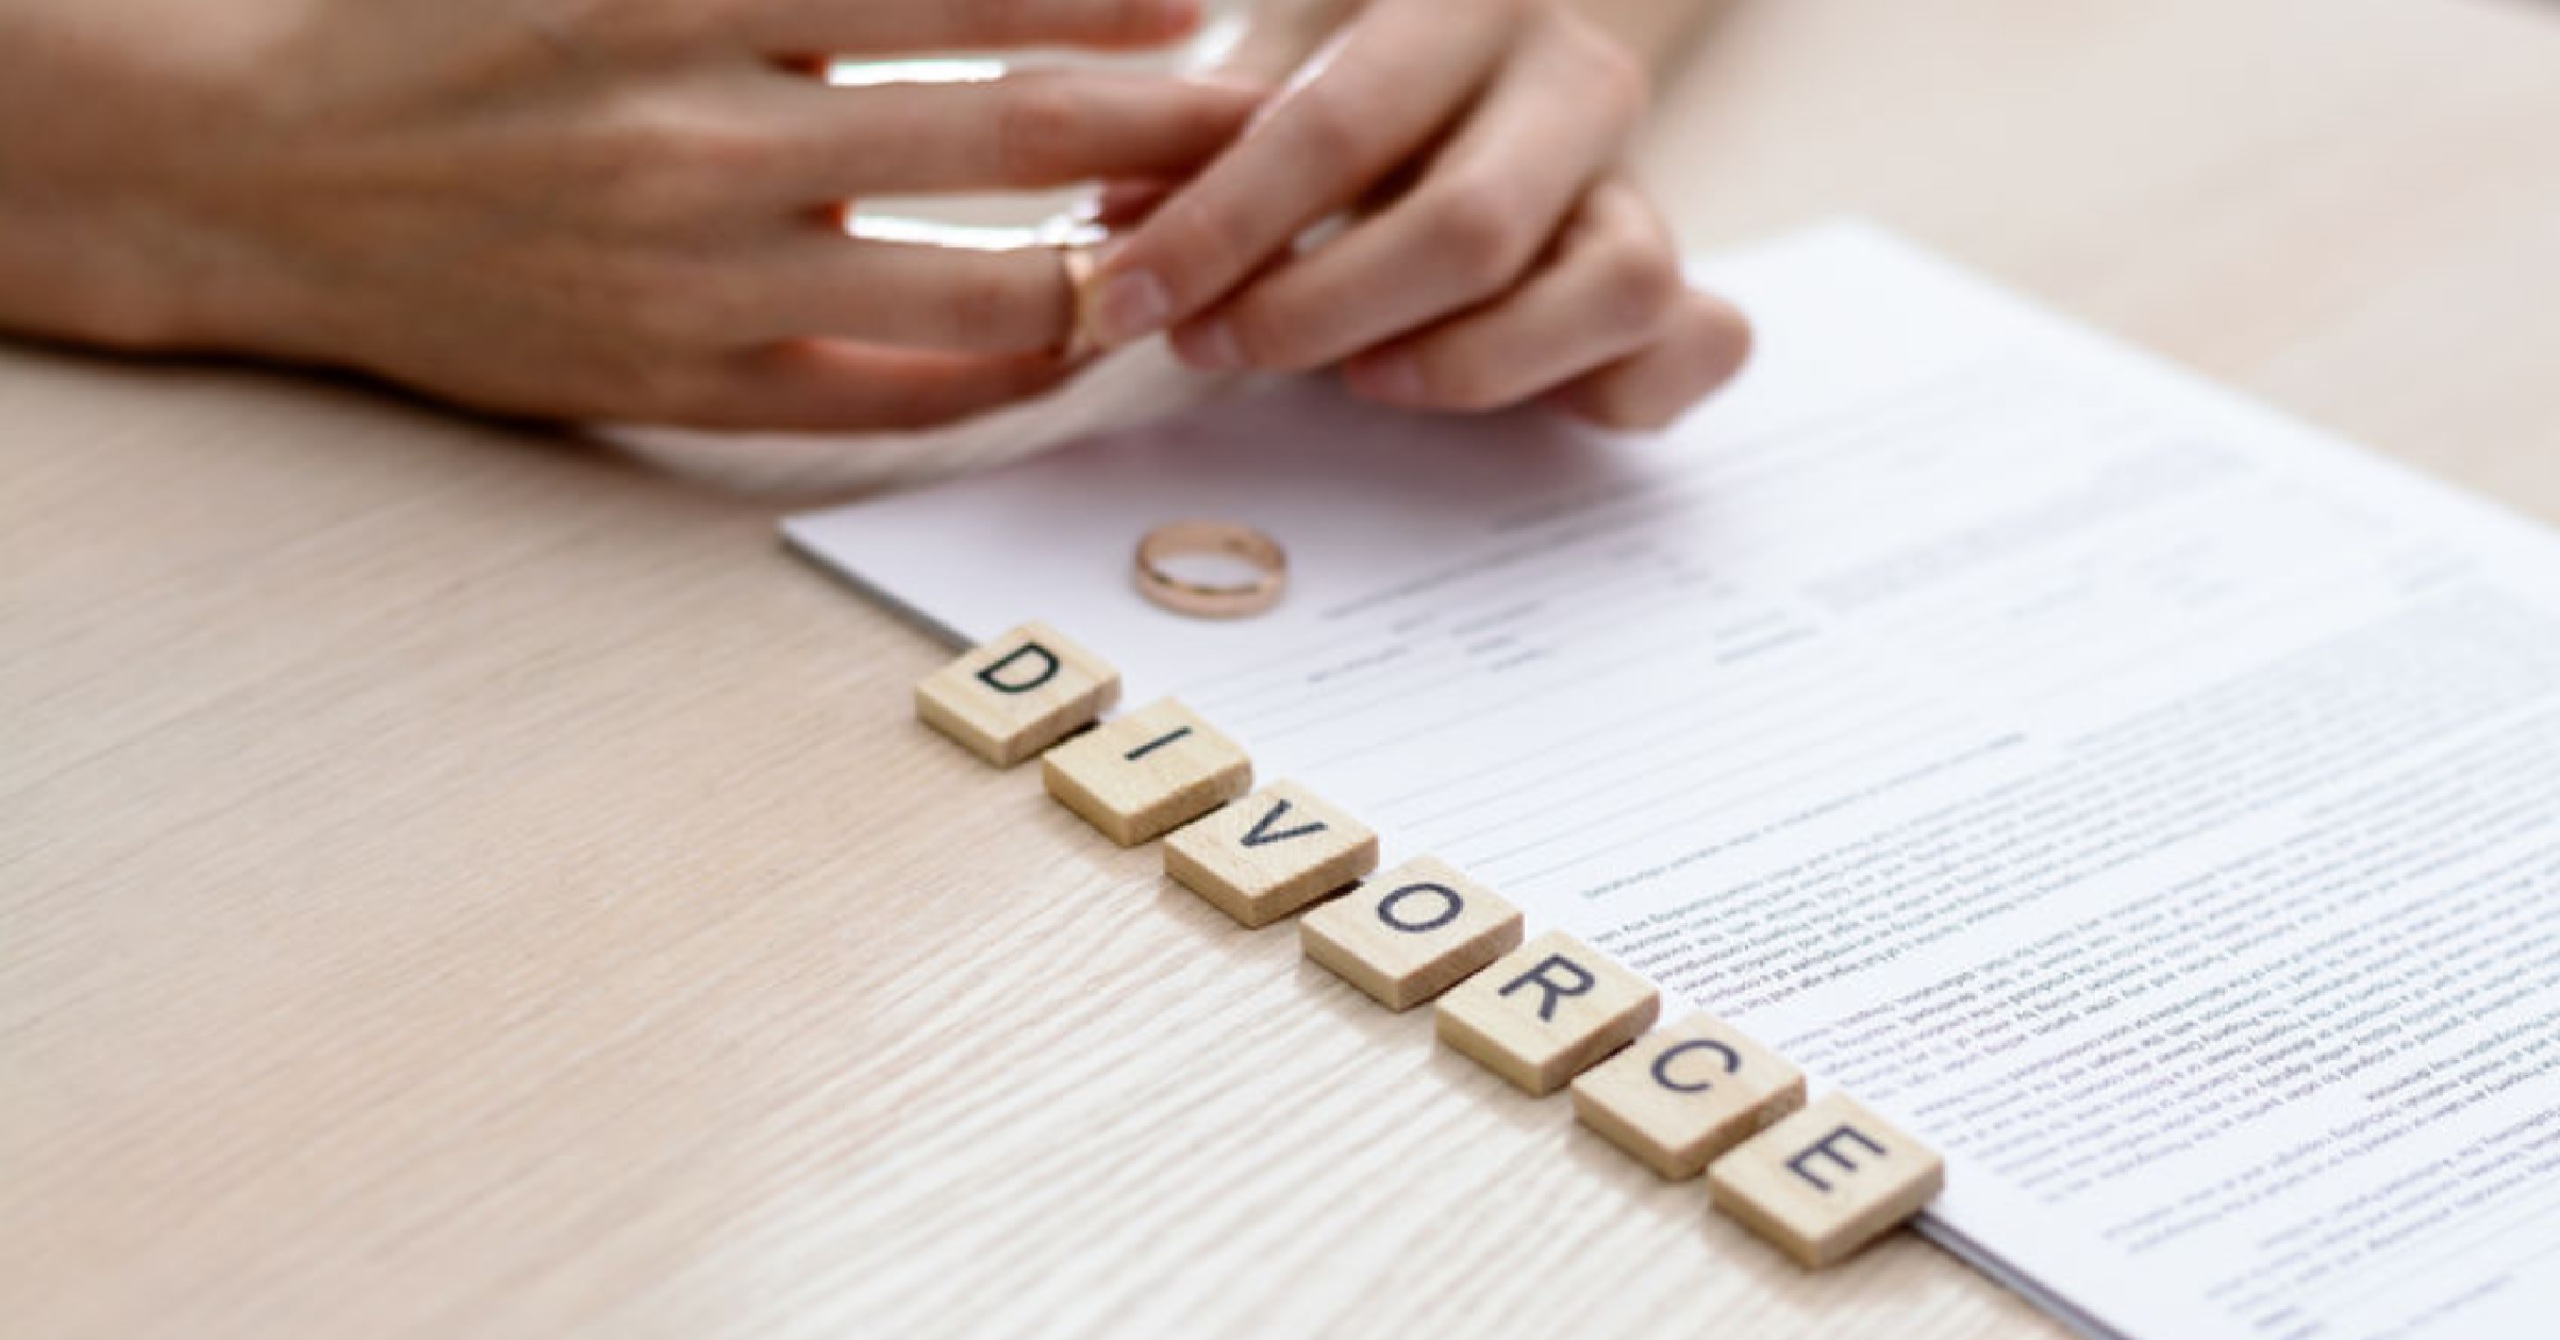 What Makes A Divorce So Expensive? - OurFamilyWizard